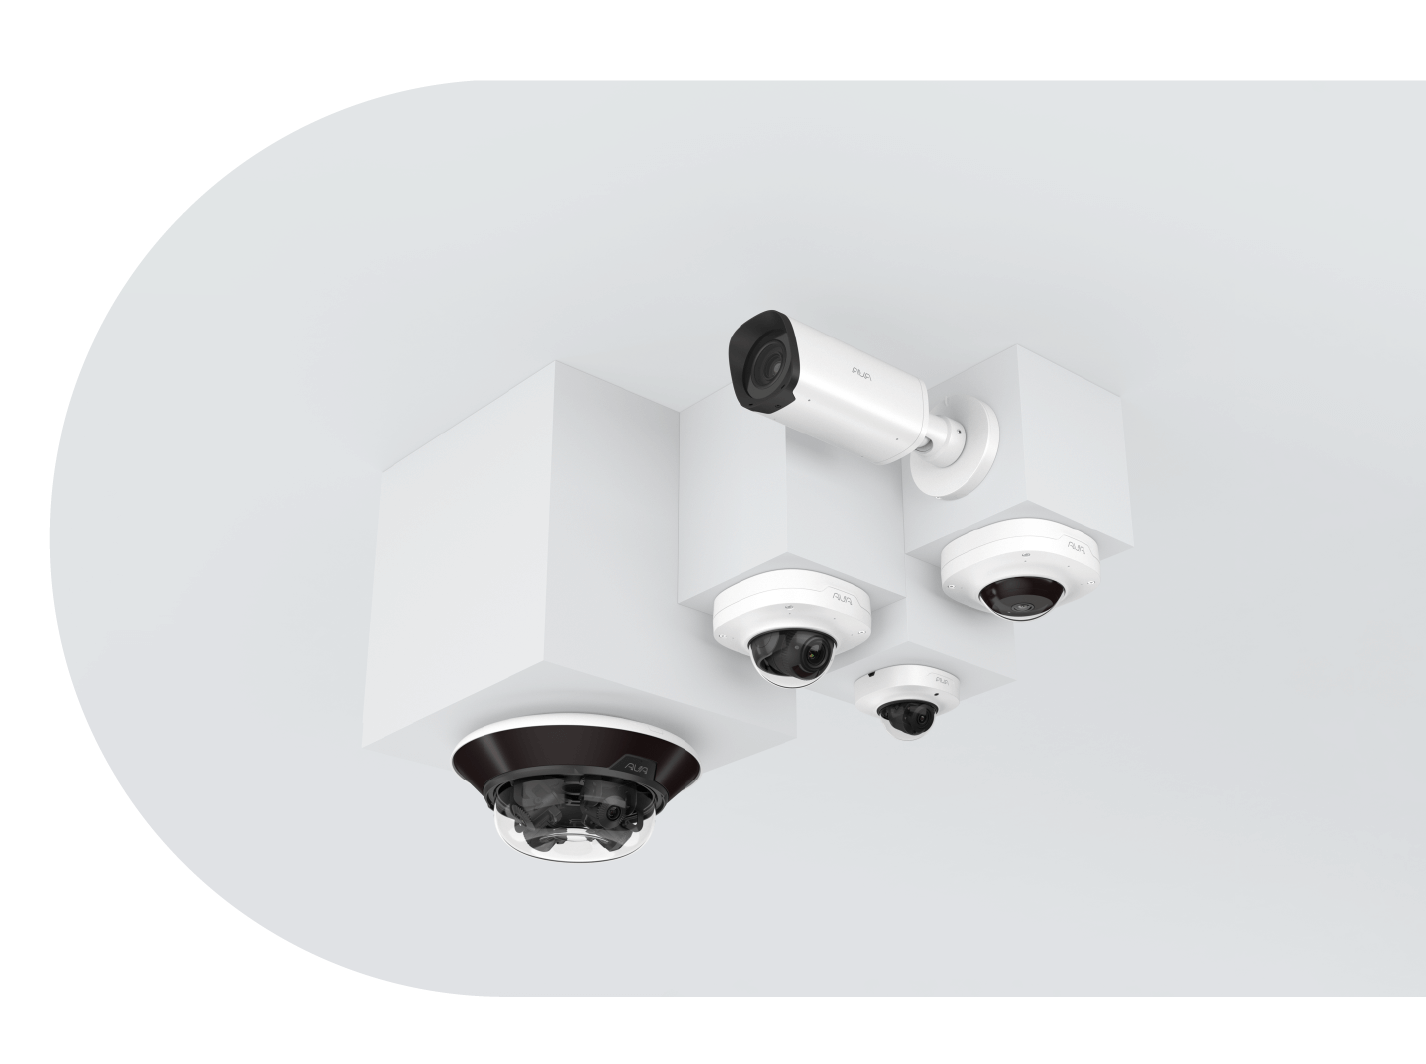 Decorative security camera on dimmed background.